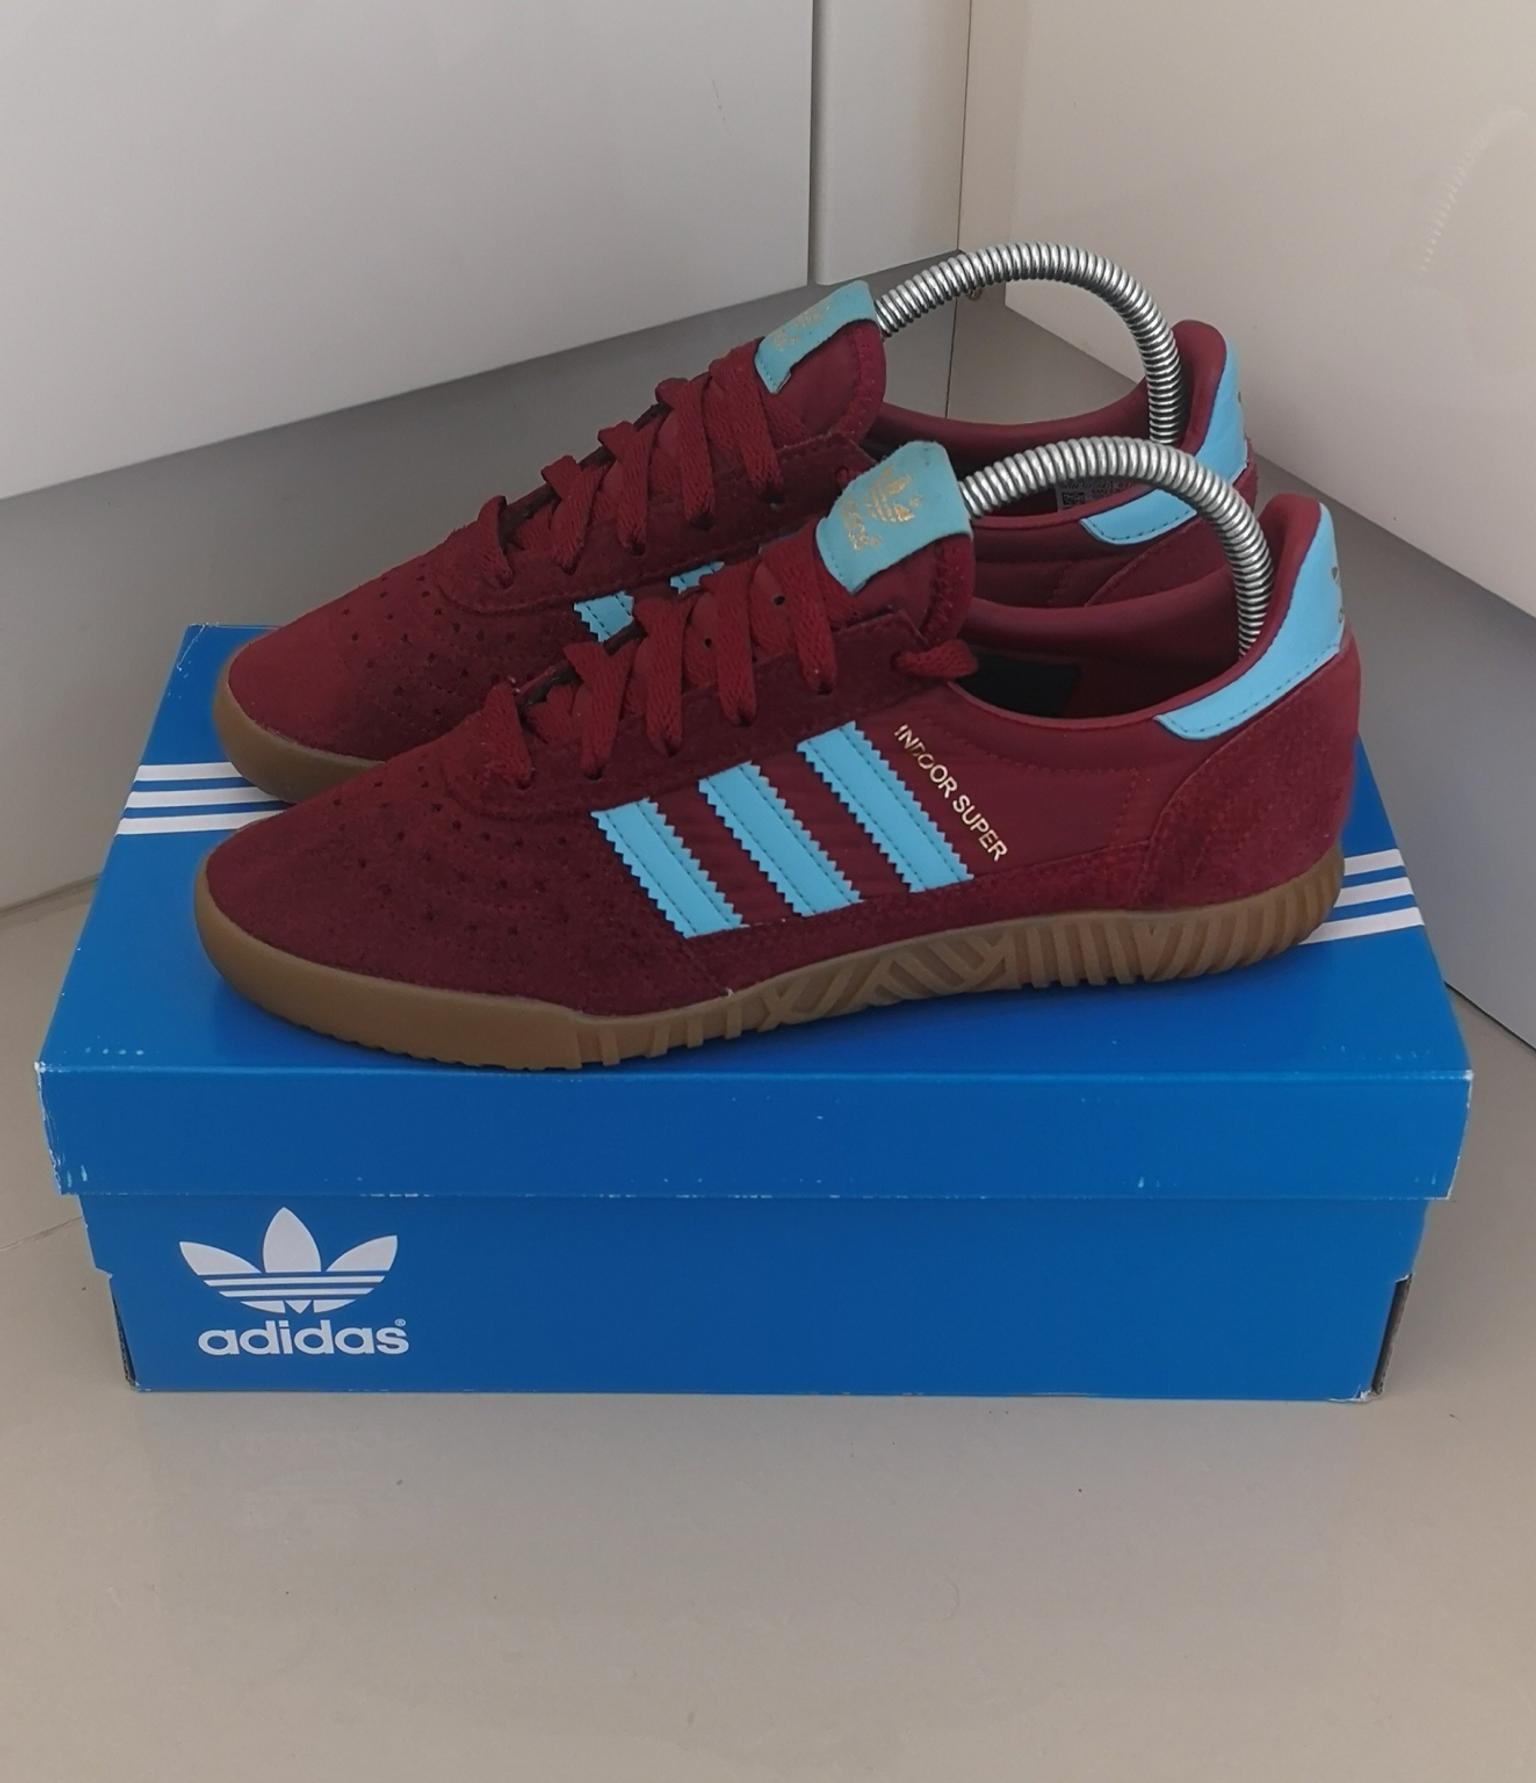 mens claret and blue trainers